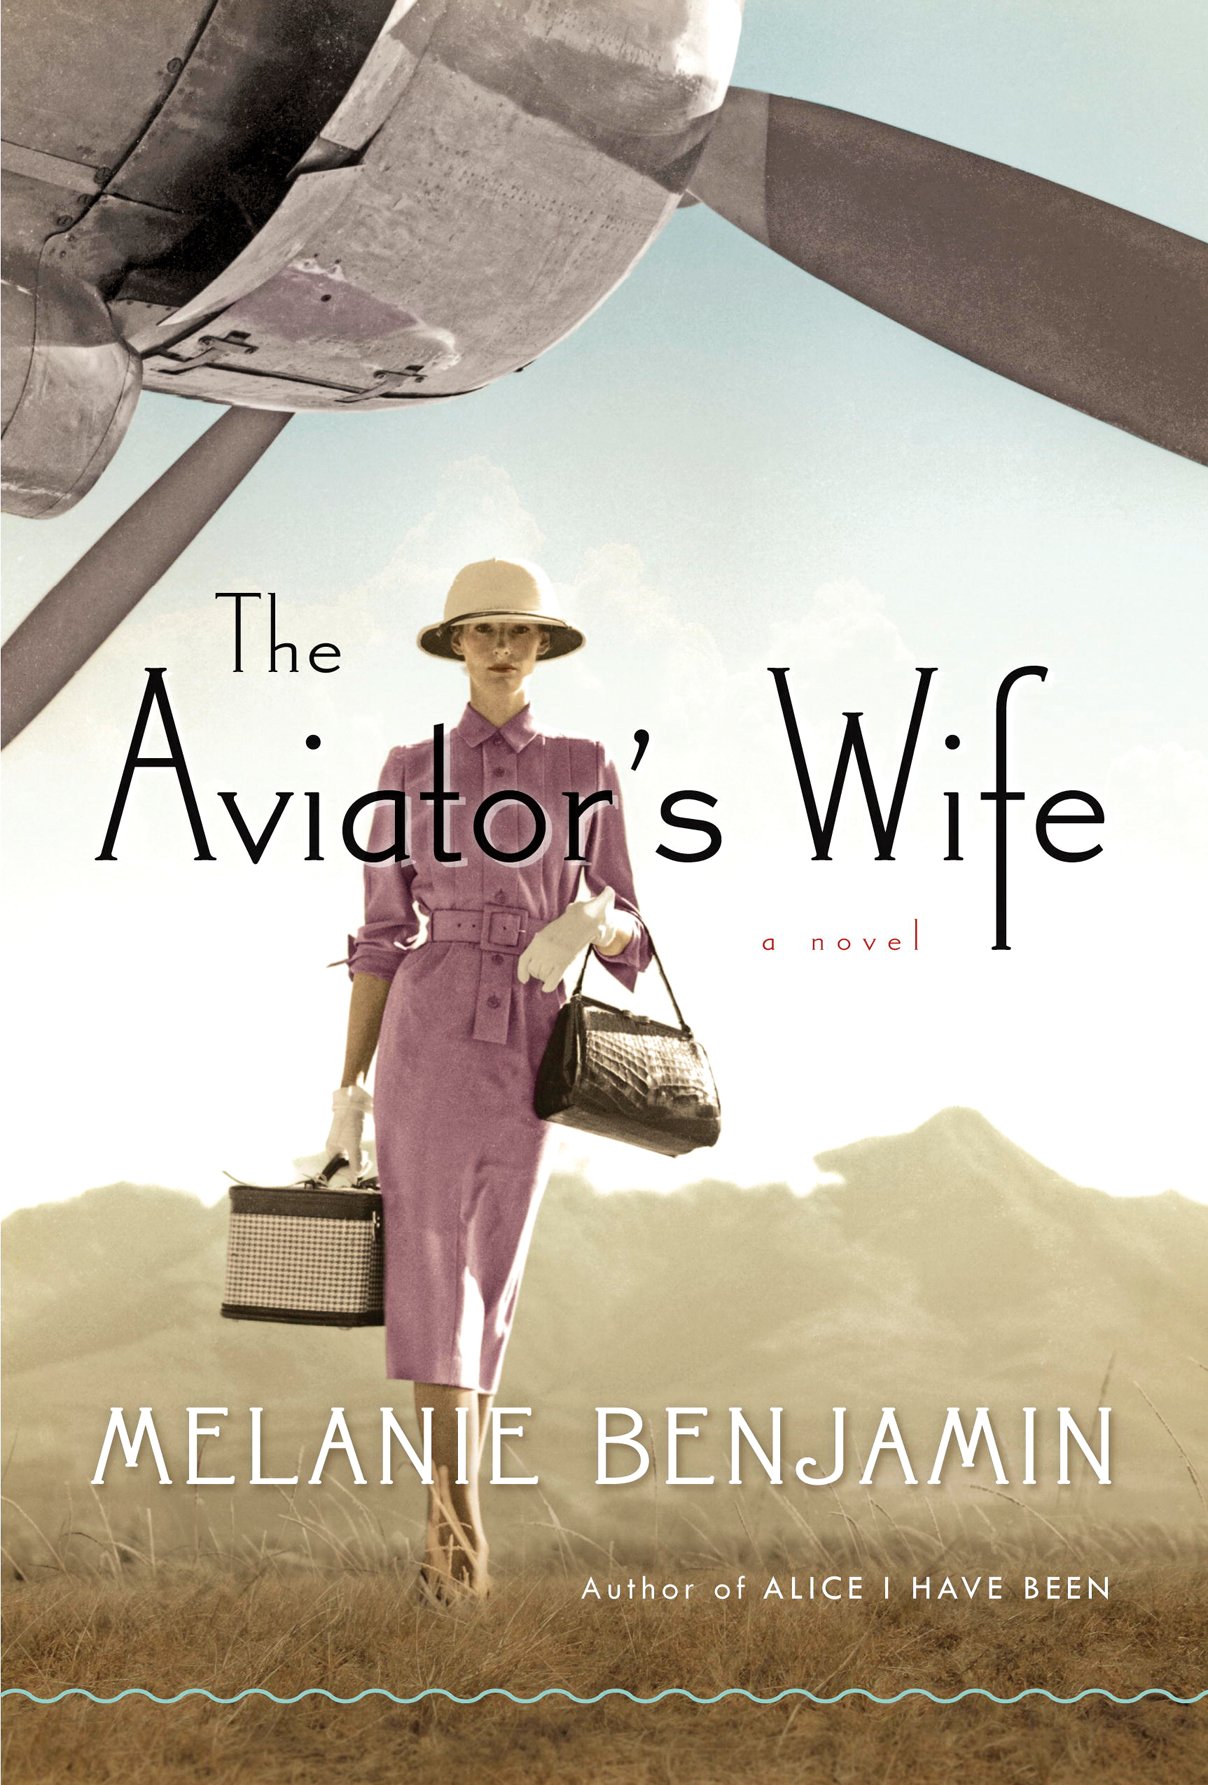 The Aviator's Wife Book Cover Mar 13 p158